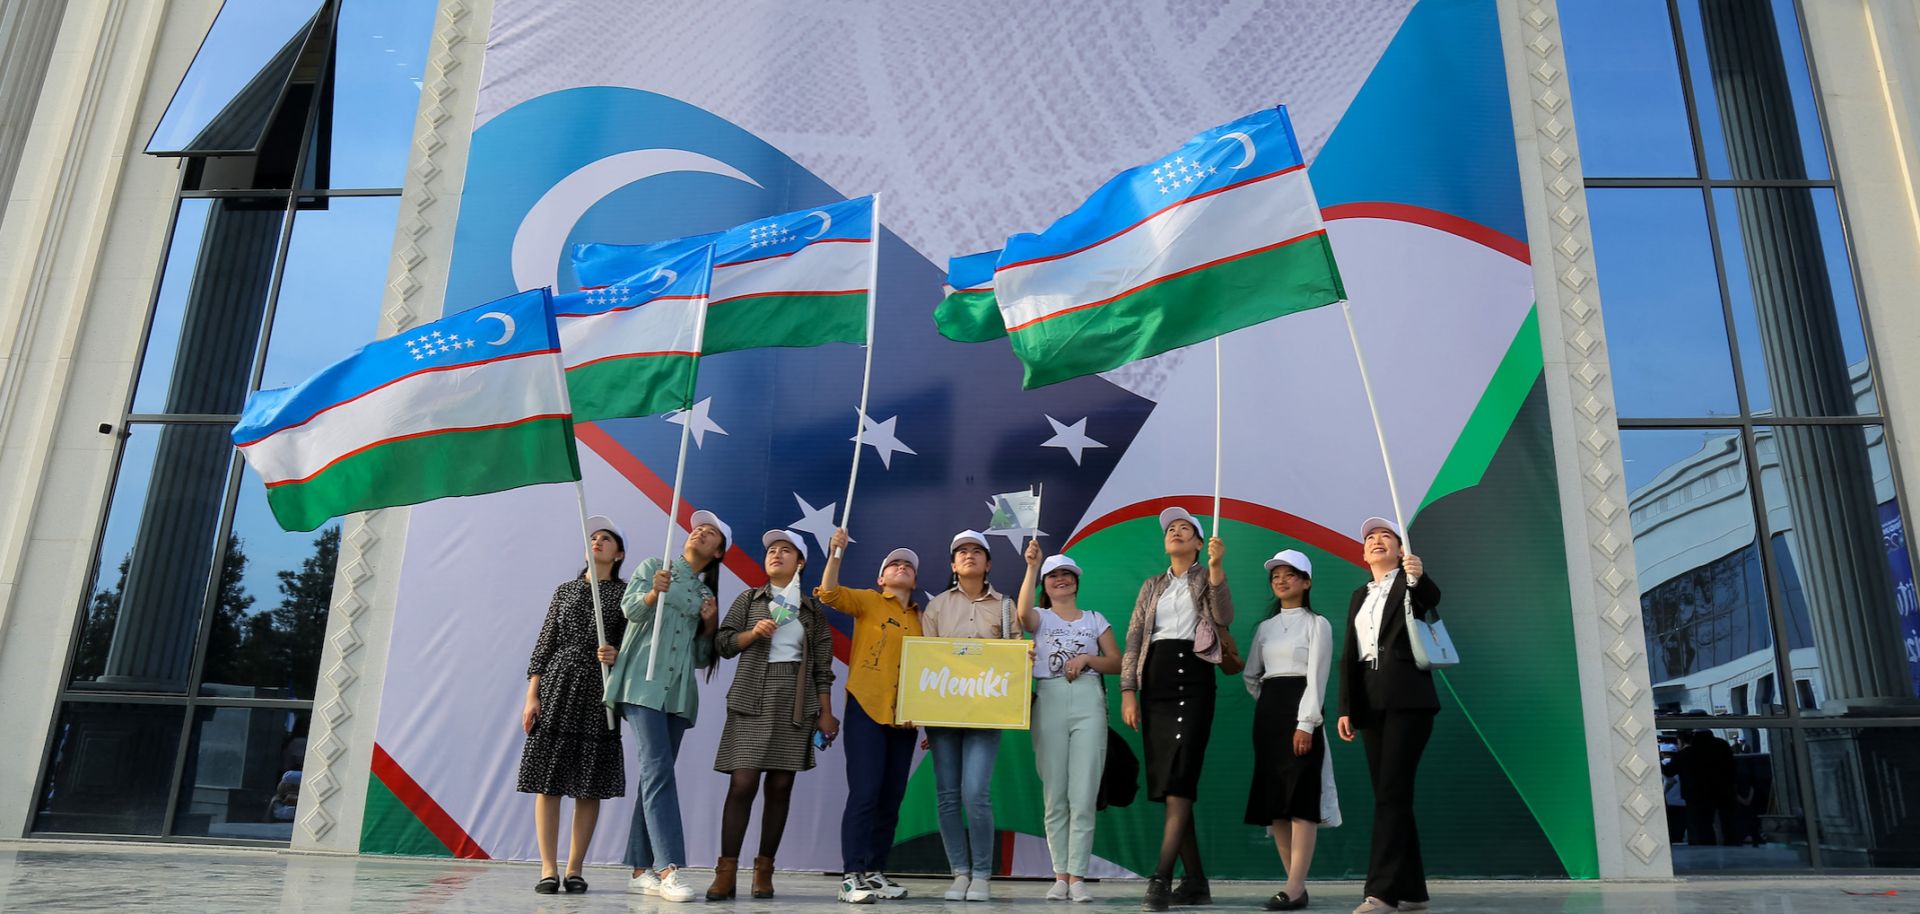 People attend a rally in support of Uzbekistan's constitutional referendum on March 28, 2023, in the city of Jizzakh, located roughly 250 kilometers (155 miles) south of the capital Tashkent.